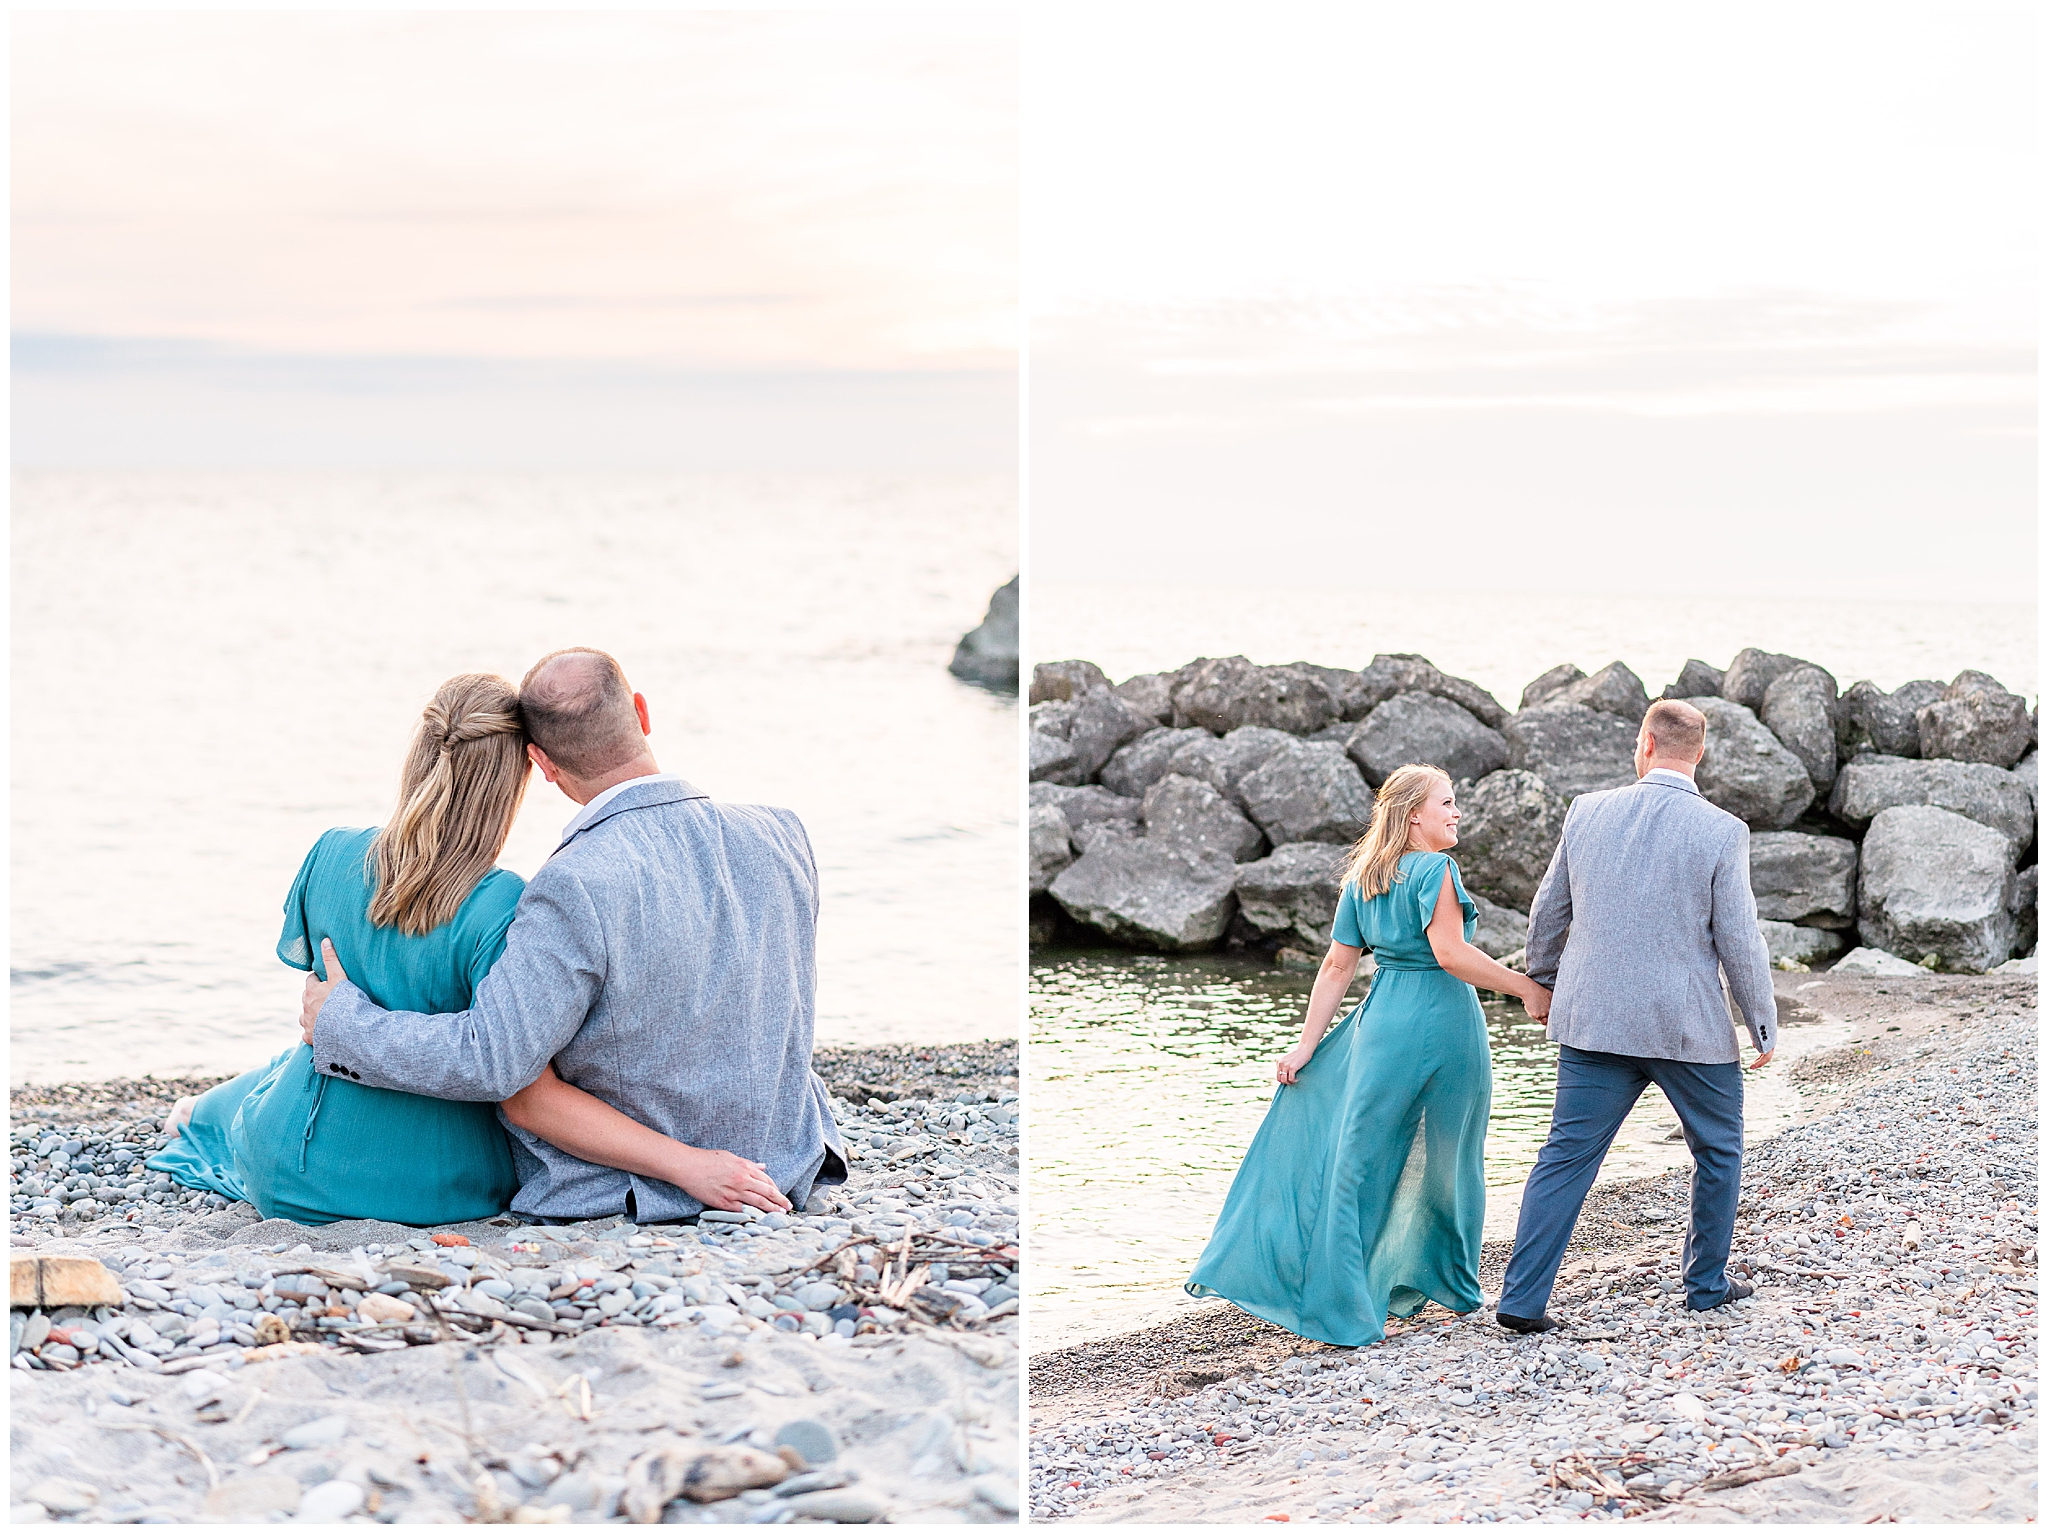 Romantic formal engagement portraits at Sims Park beach in Cleveland Ohio. Woman is wearing a long formal teal gown with flowing sleeves. The man is in a grey suit and white button up shirt. Walking hand in hand towards the sunset in the golden light. 